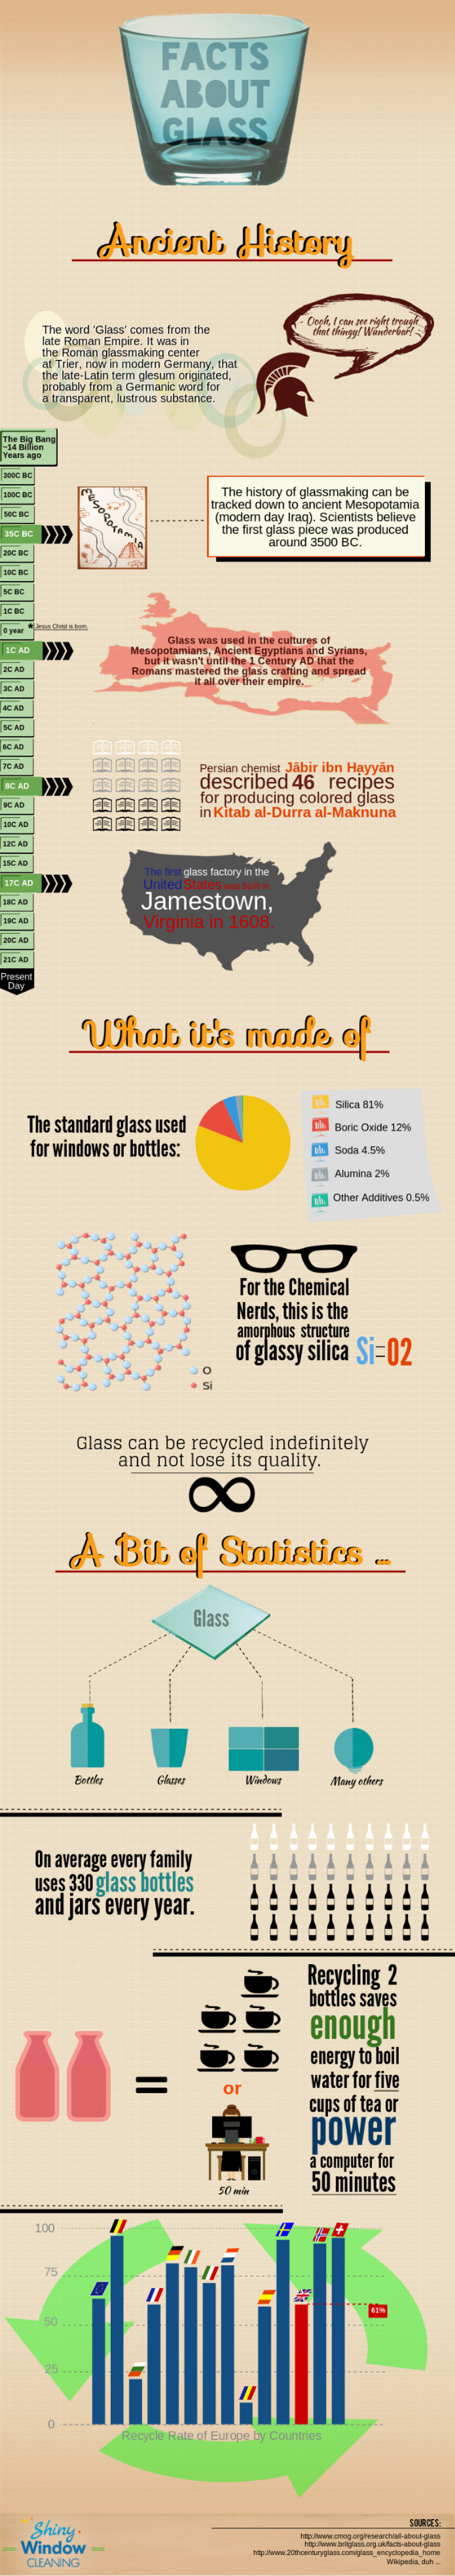 Facts About Glass Infographic